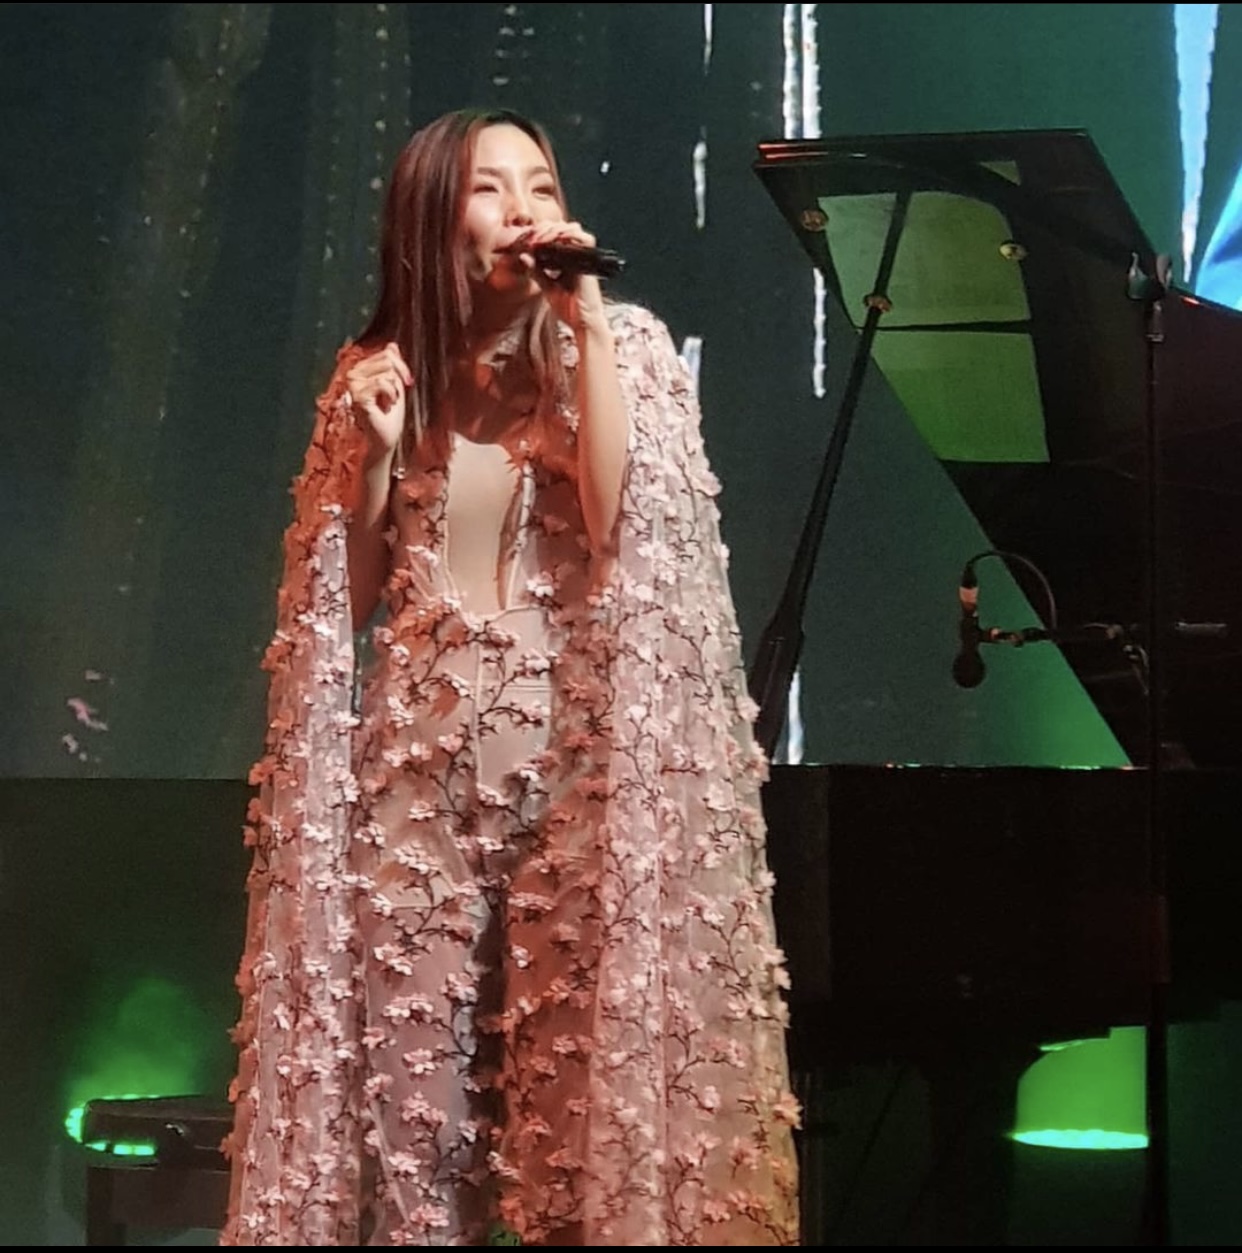 Dami Im performed in her own concert at the Adelaide Festival “Summerhouse”